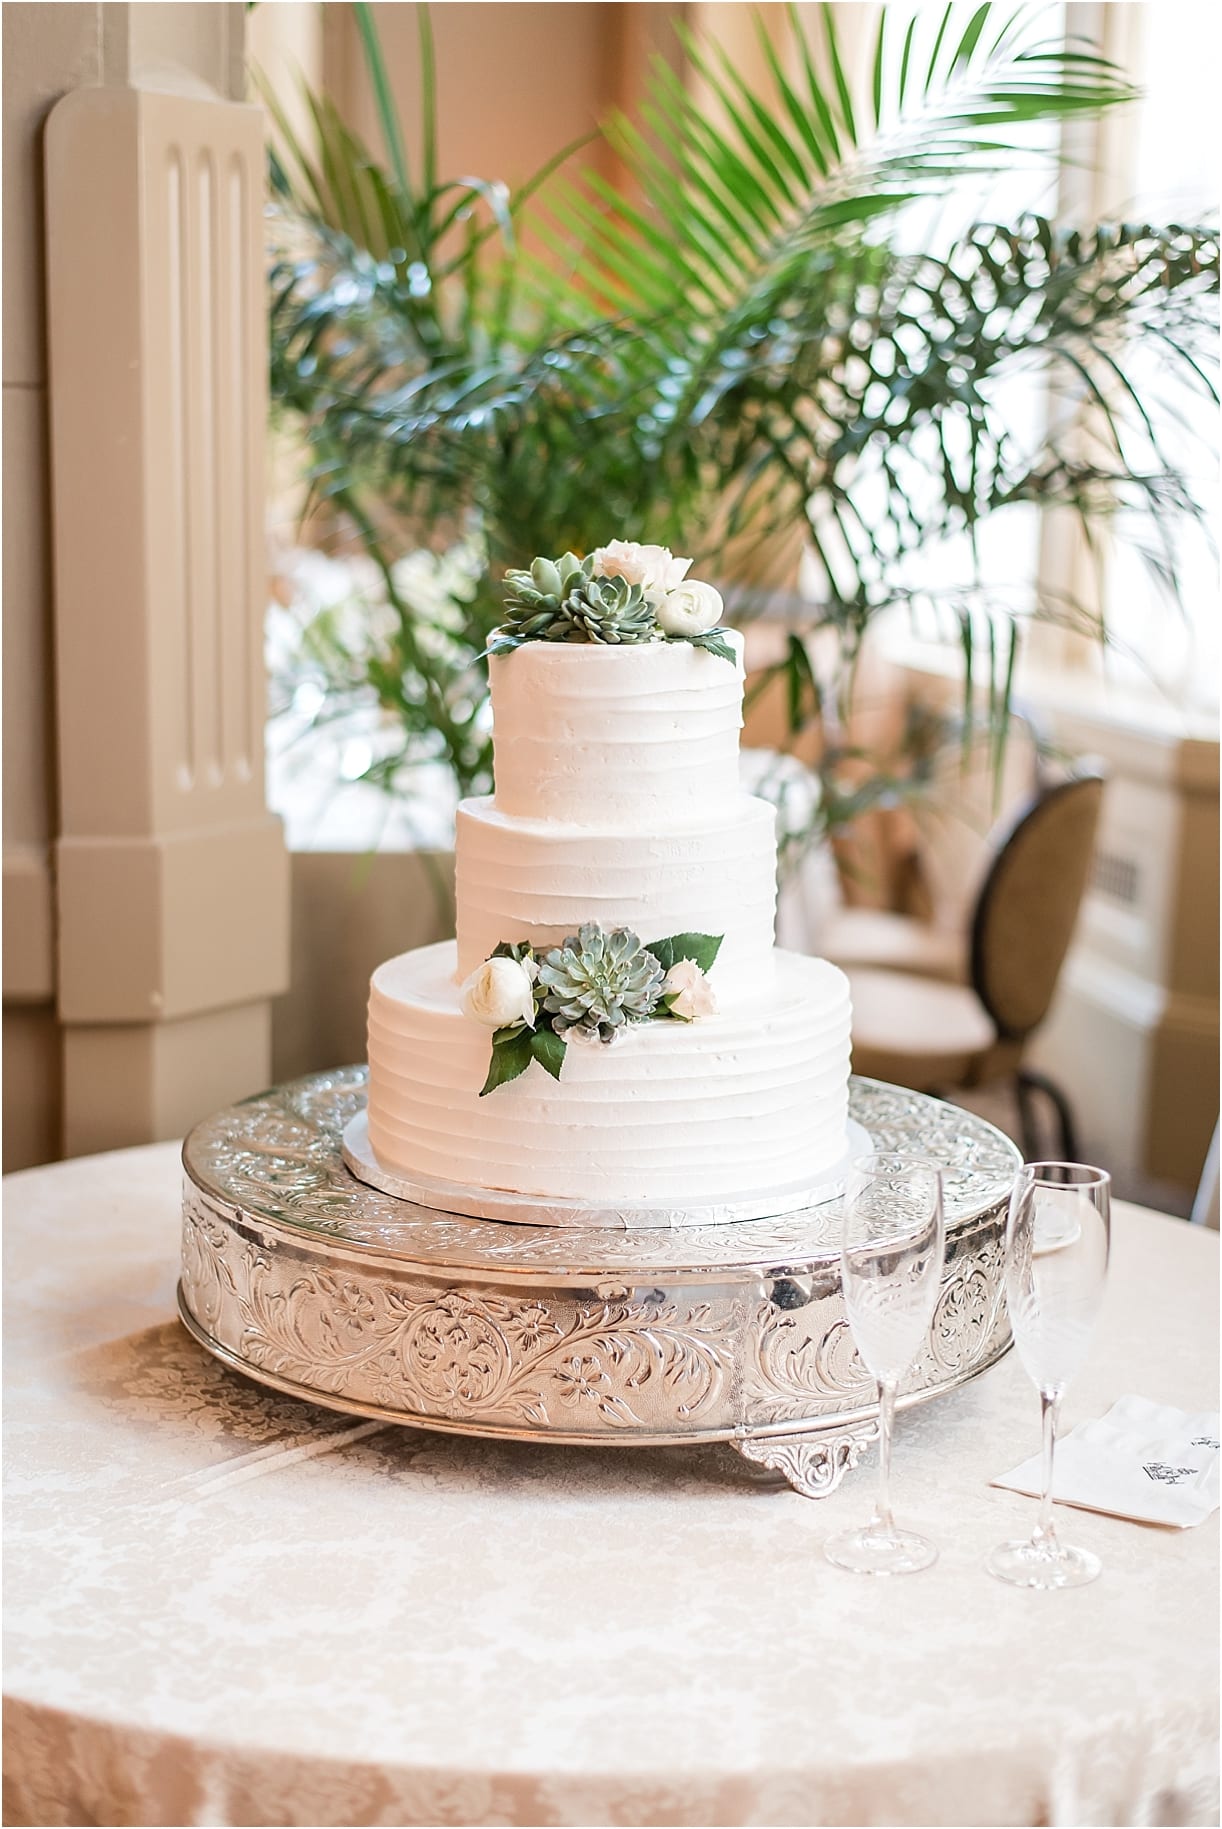 Sophisticated Richmond Wedding in Virginia as seen on Hill City Bride by Melissa Desjardins Photography Cake